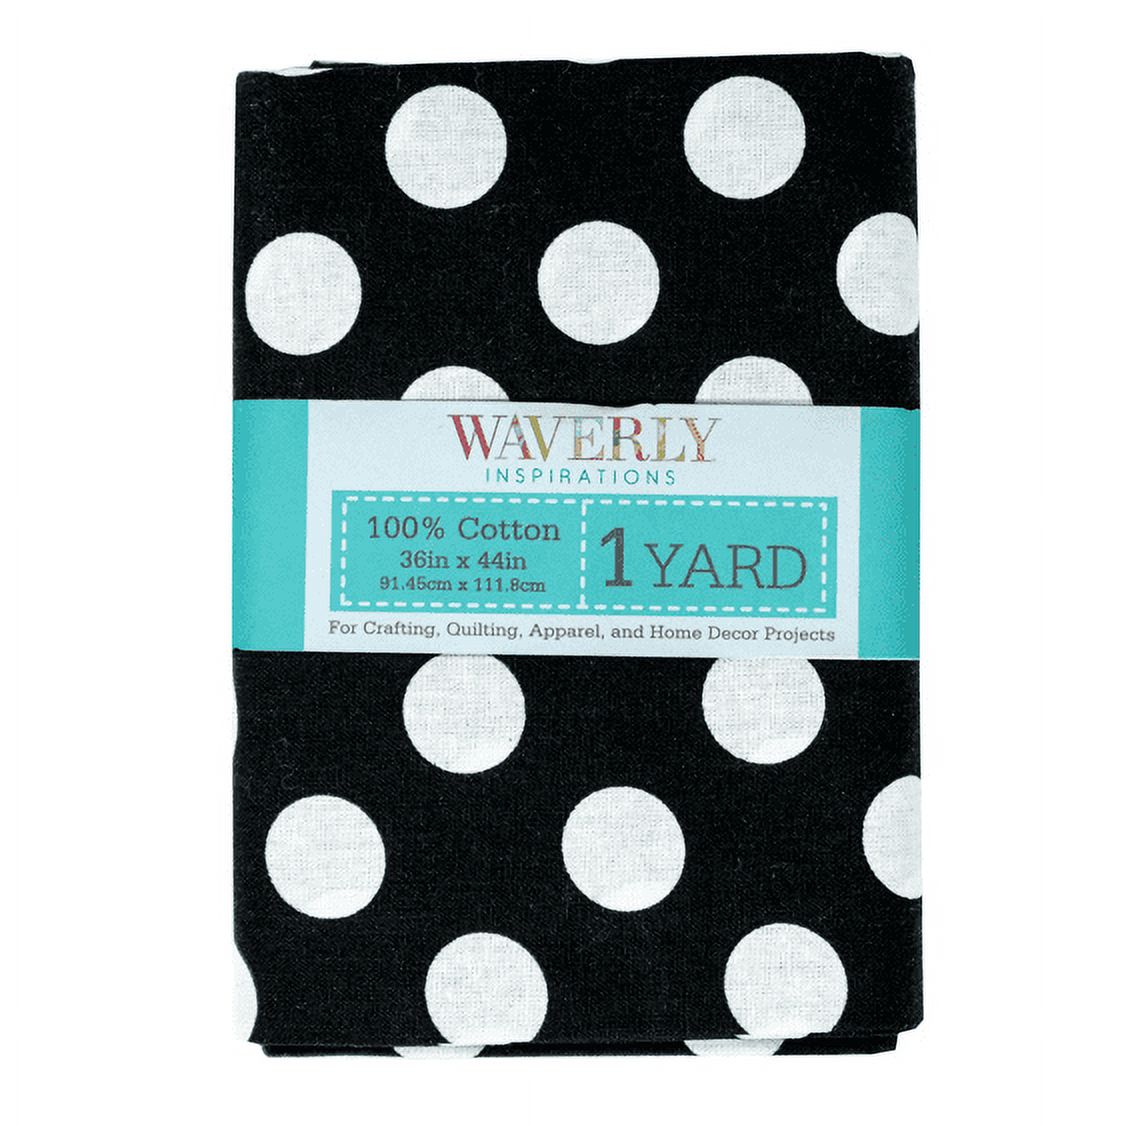 Waverly Inspirations 44" x 1 Yard Cotton Precut Large Dot Onyx Color Sewing Fabric, 1 Each - image 1 of 3